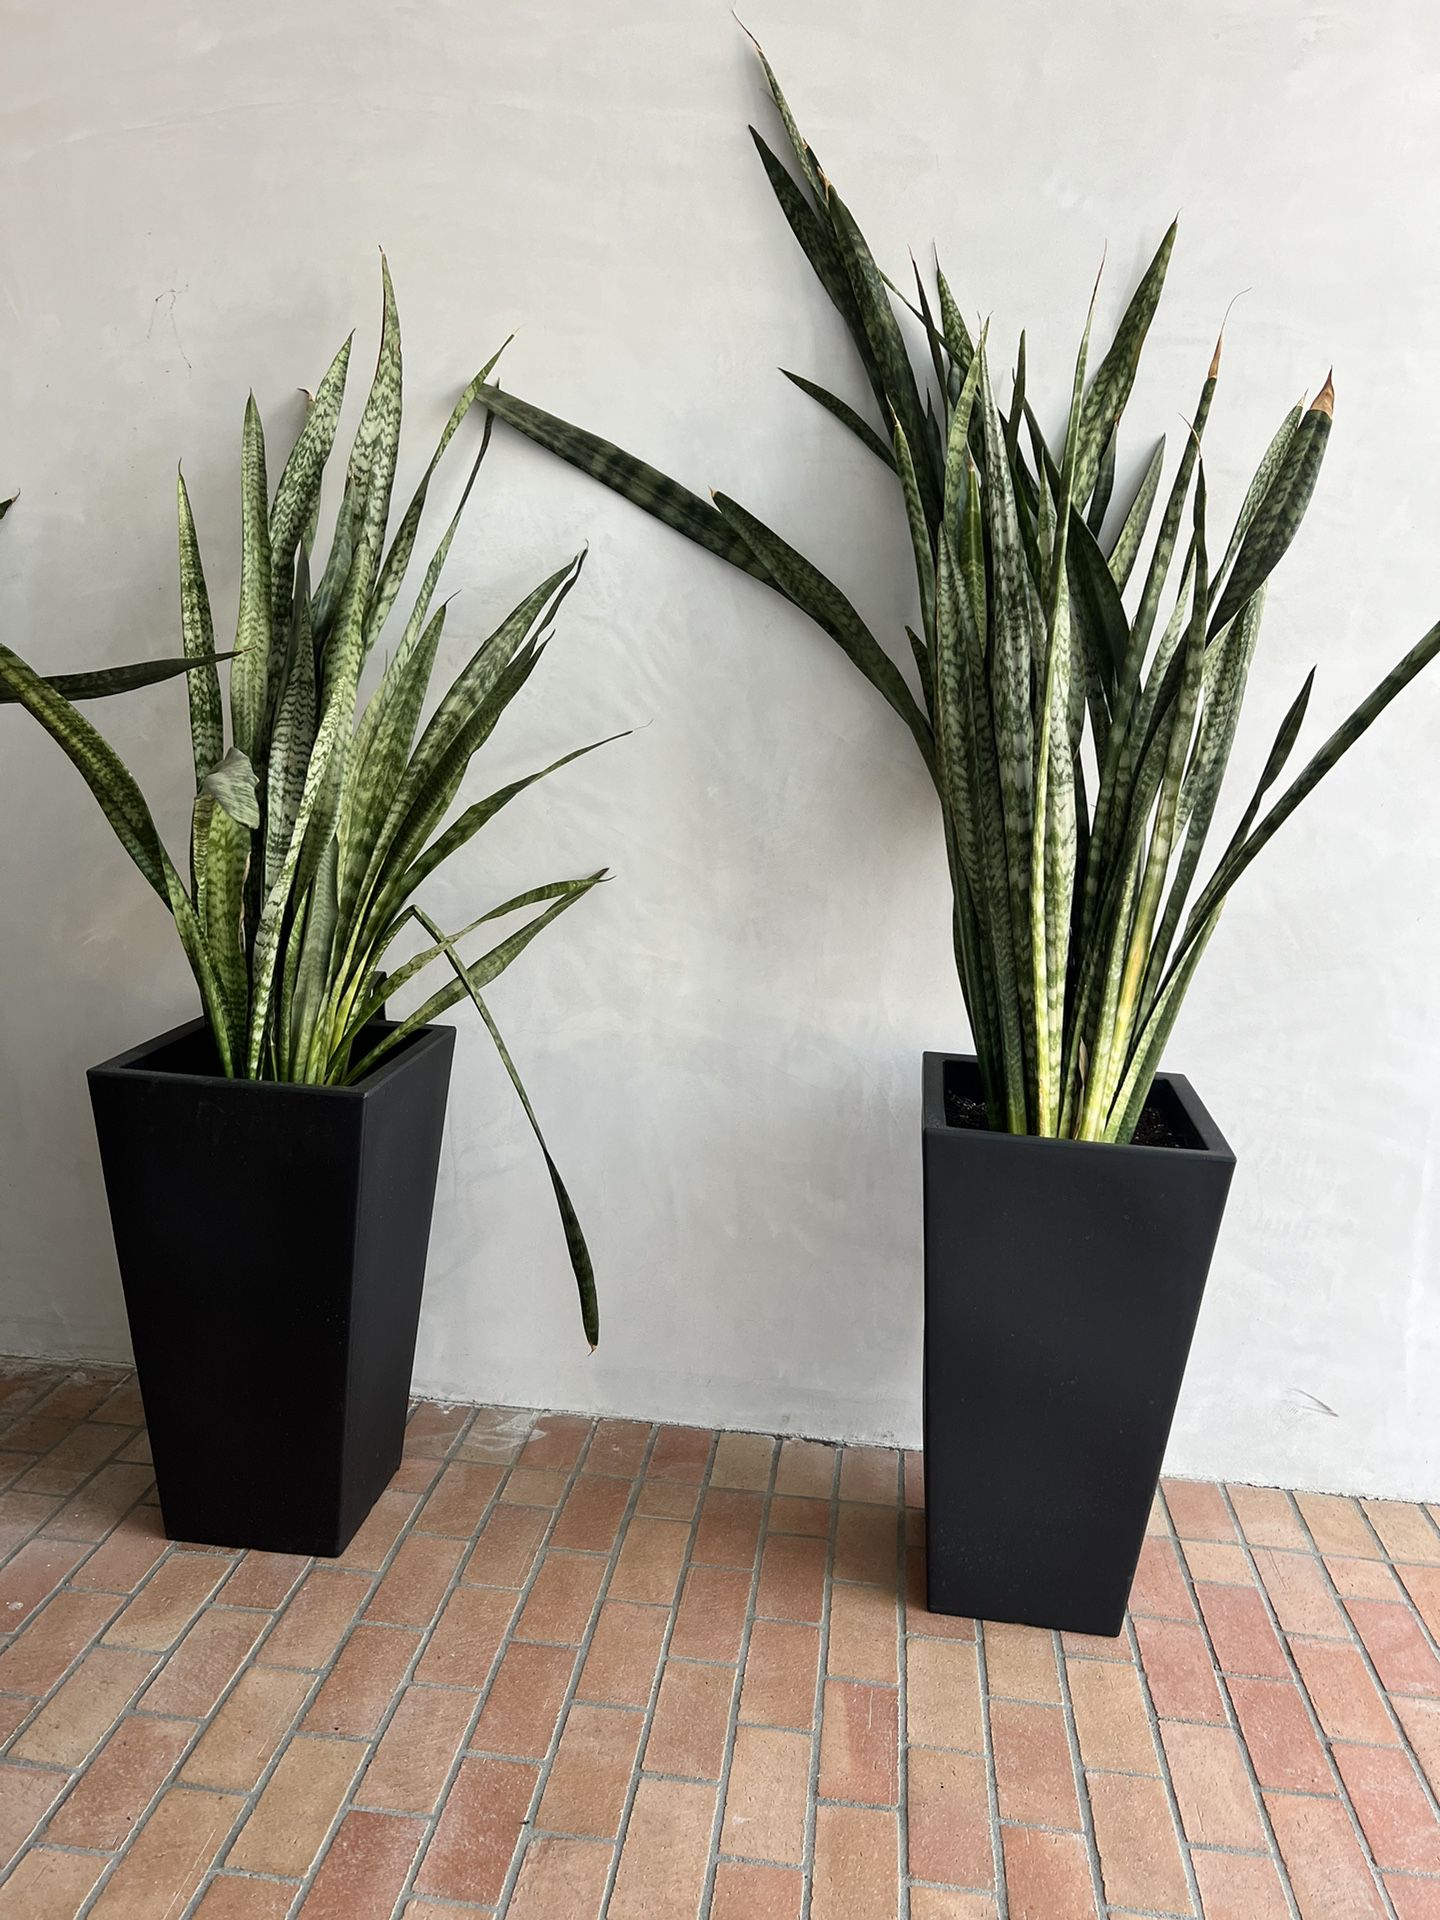 New Large Planter With Snake Plant